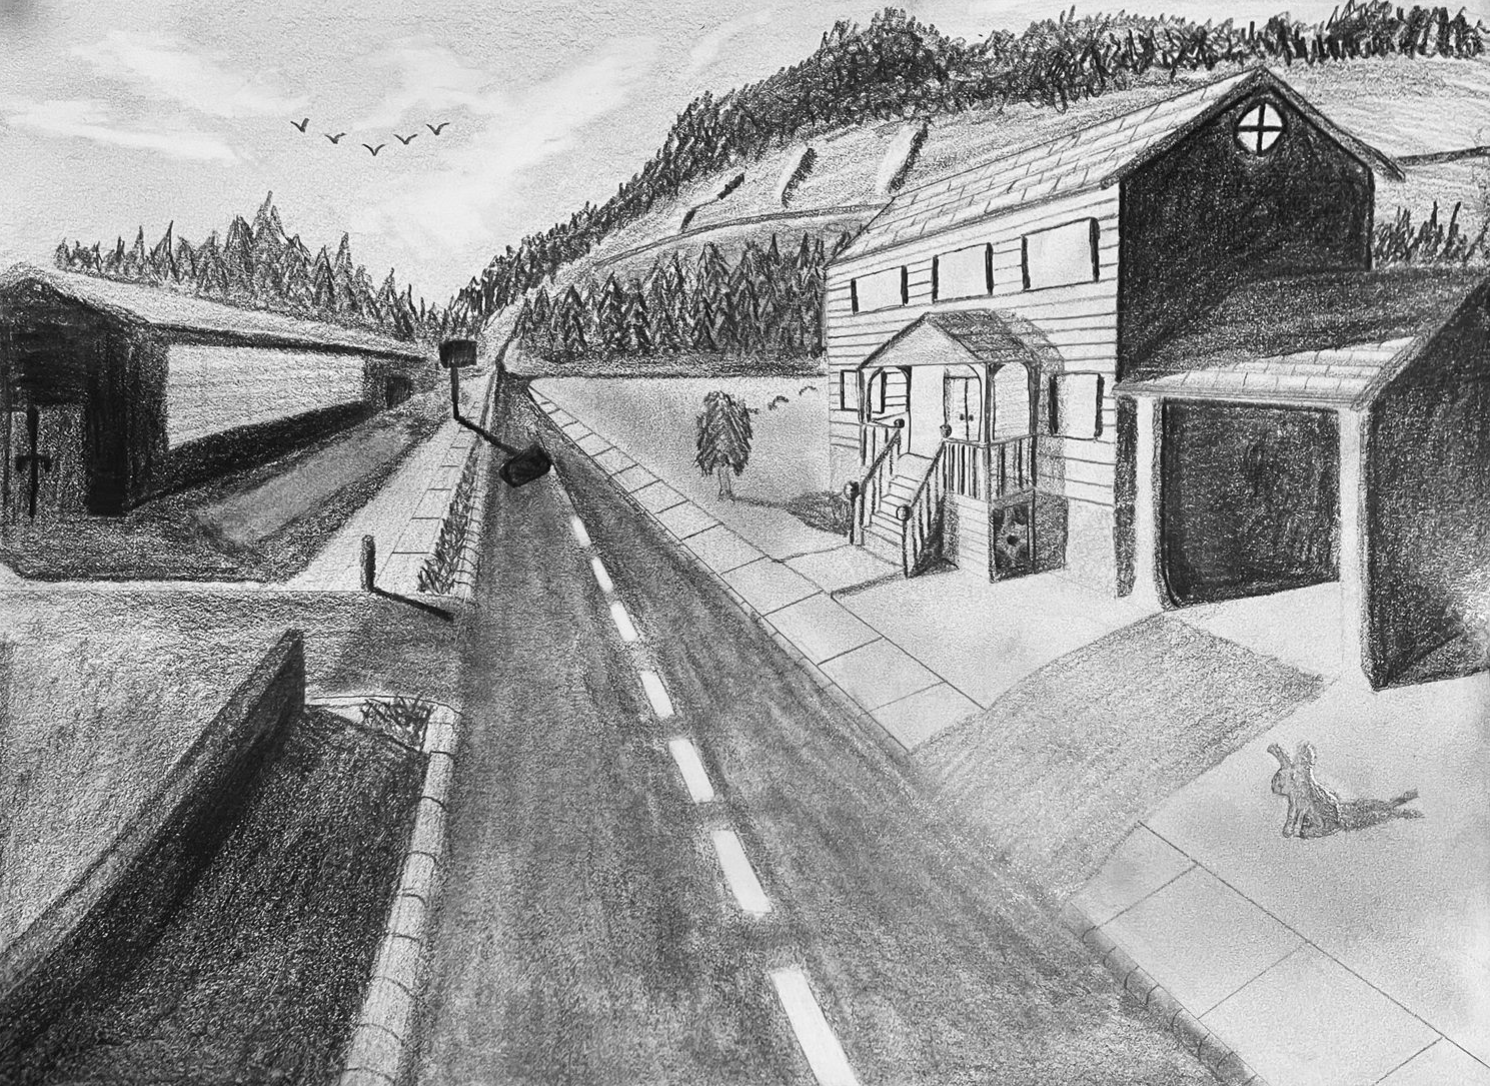 Drawing of road in country bisected by barn on left, house on right, and with hill ahead